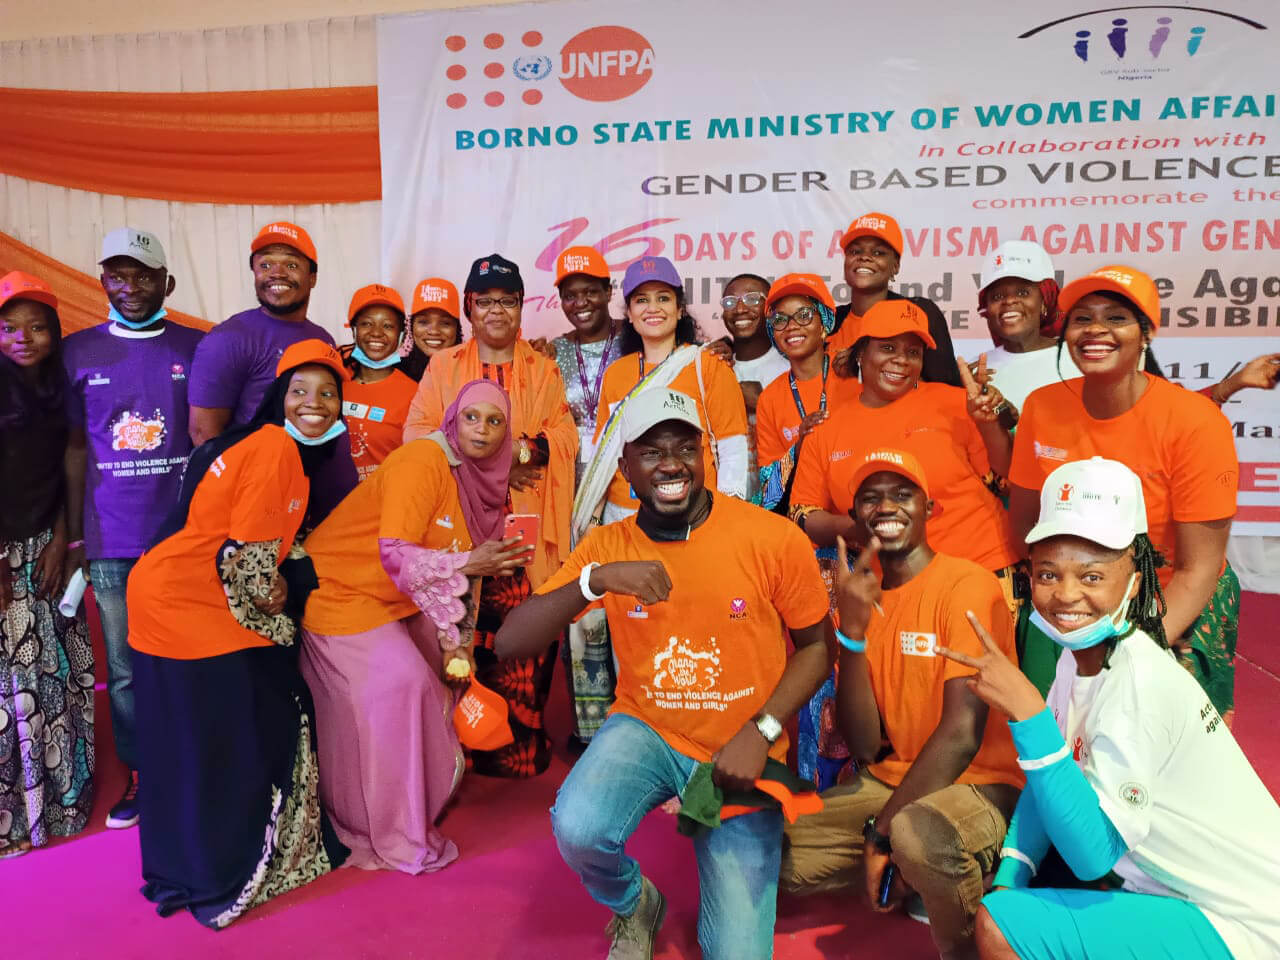 Our Nigeria teams held a series of education sessions and focus groups during the 16 Days of Activism.